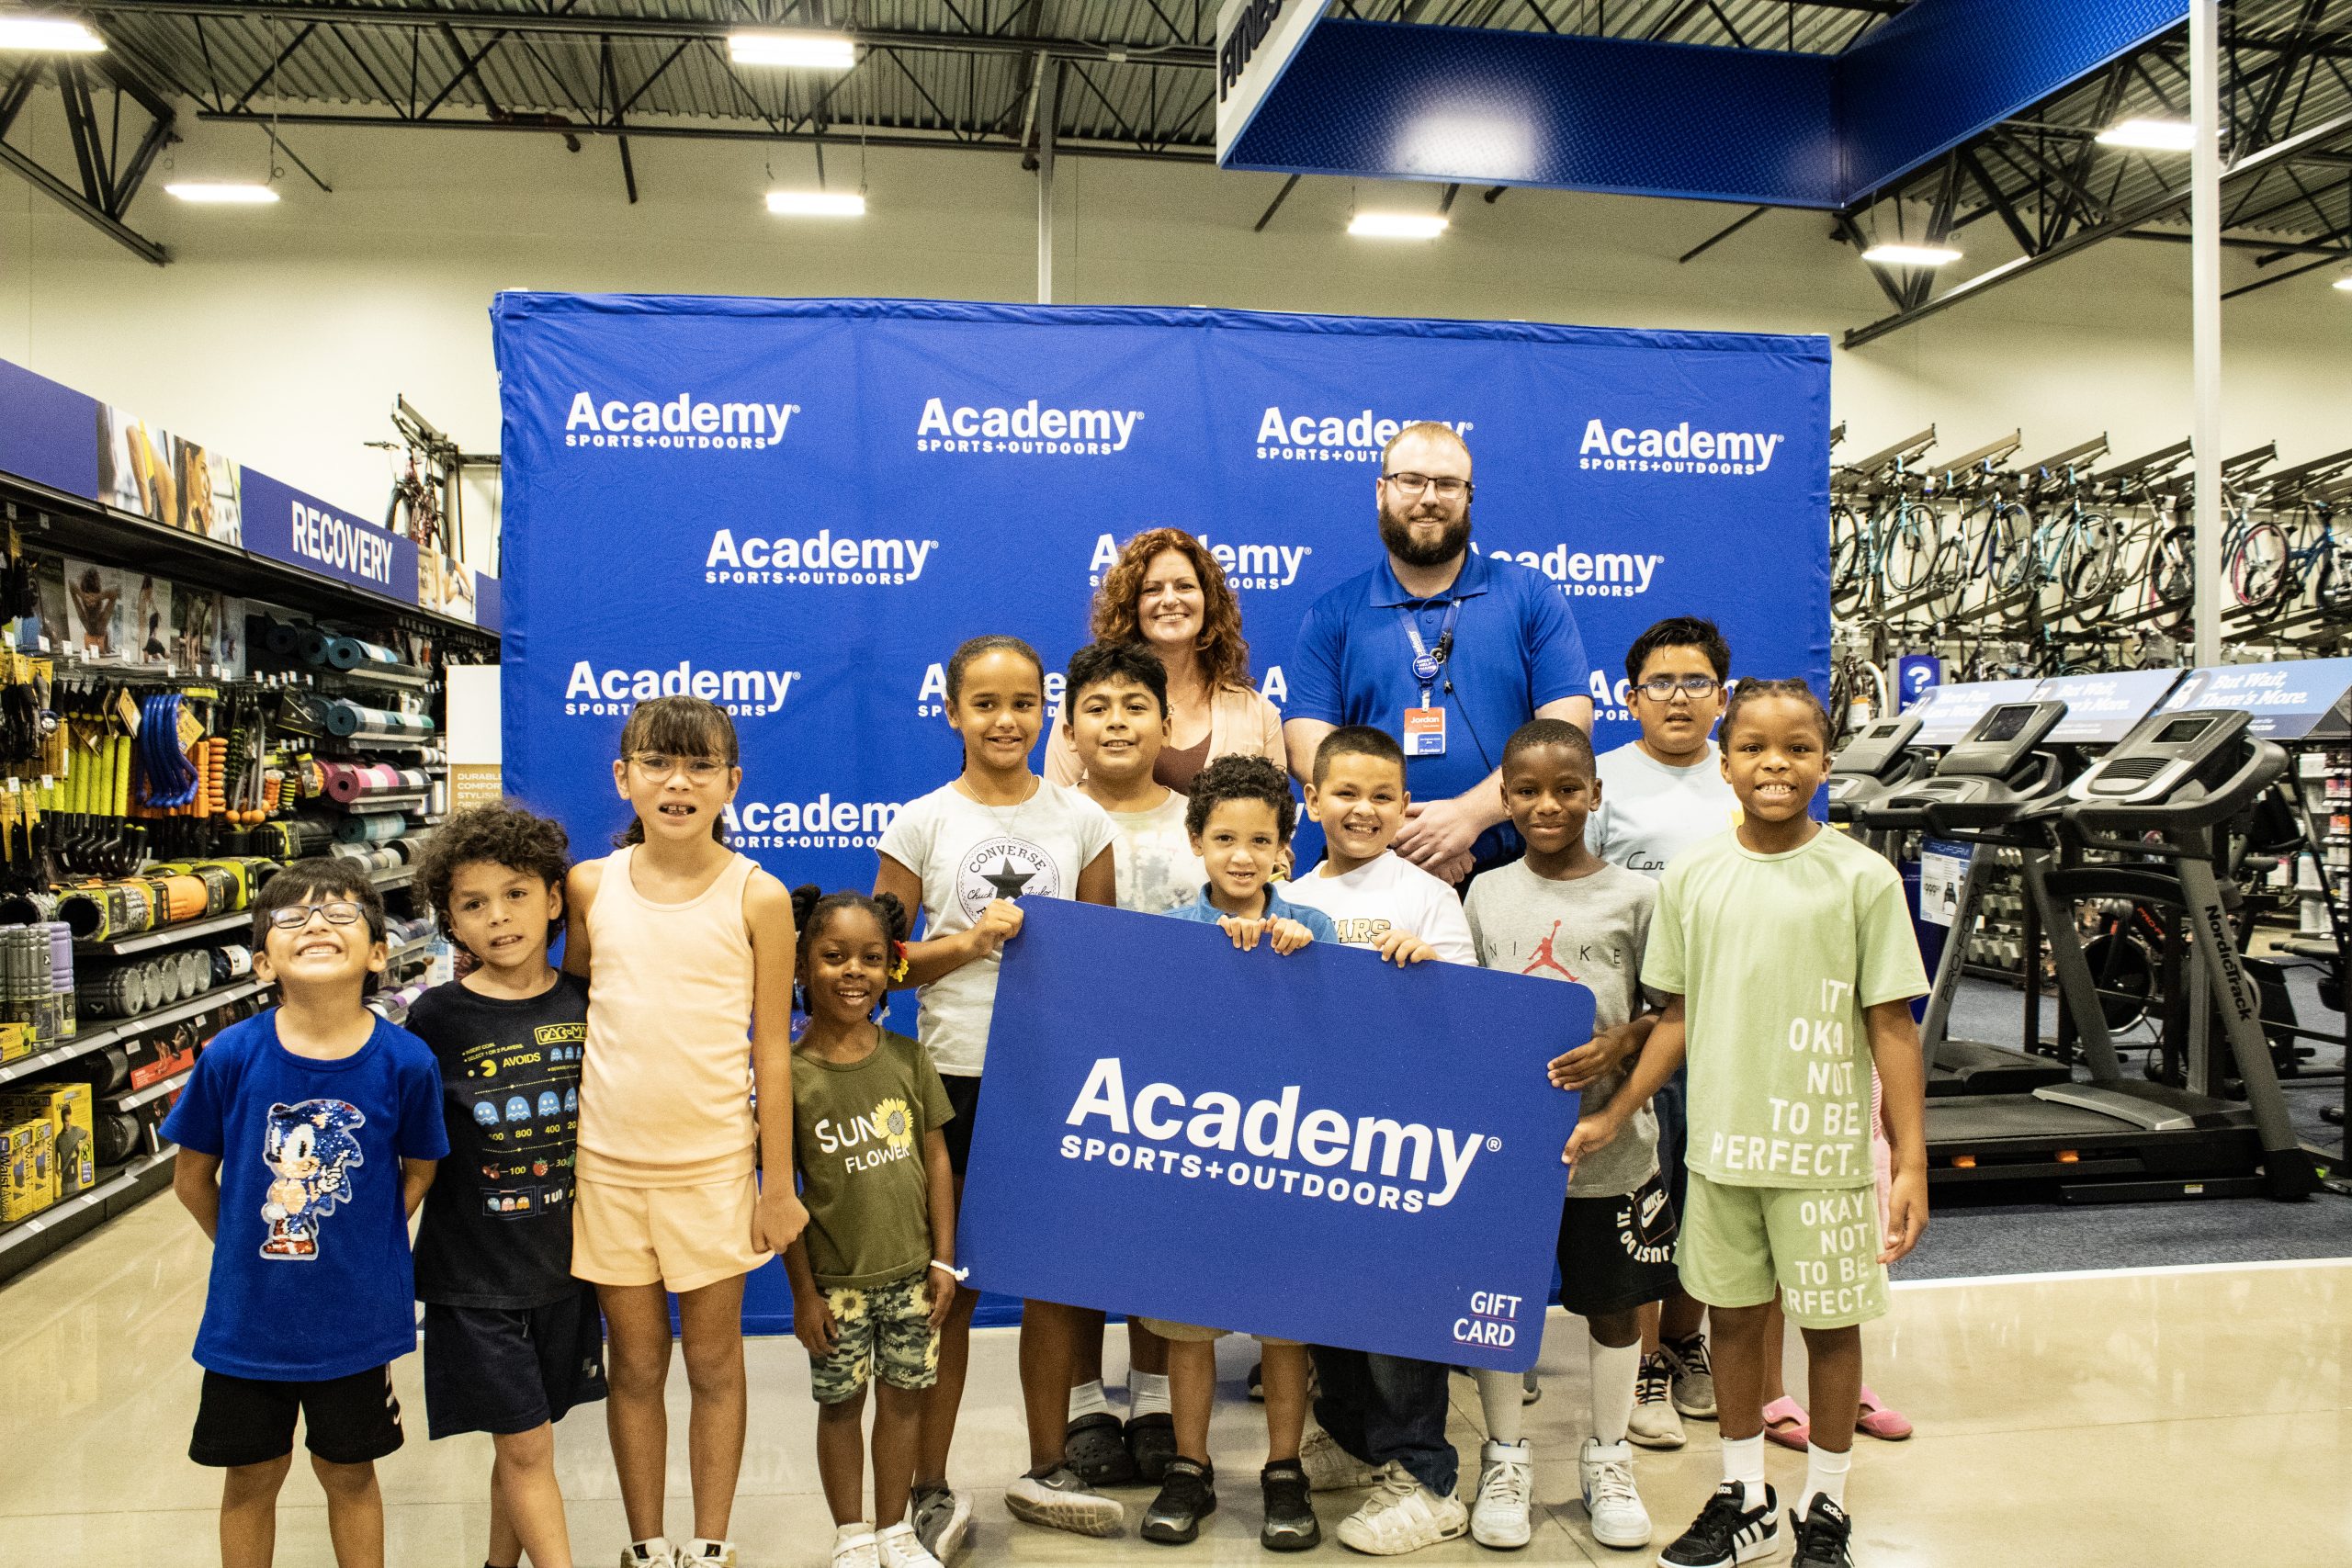 YMCA gets sporty at new Academy